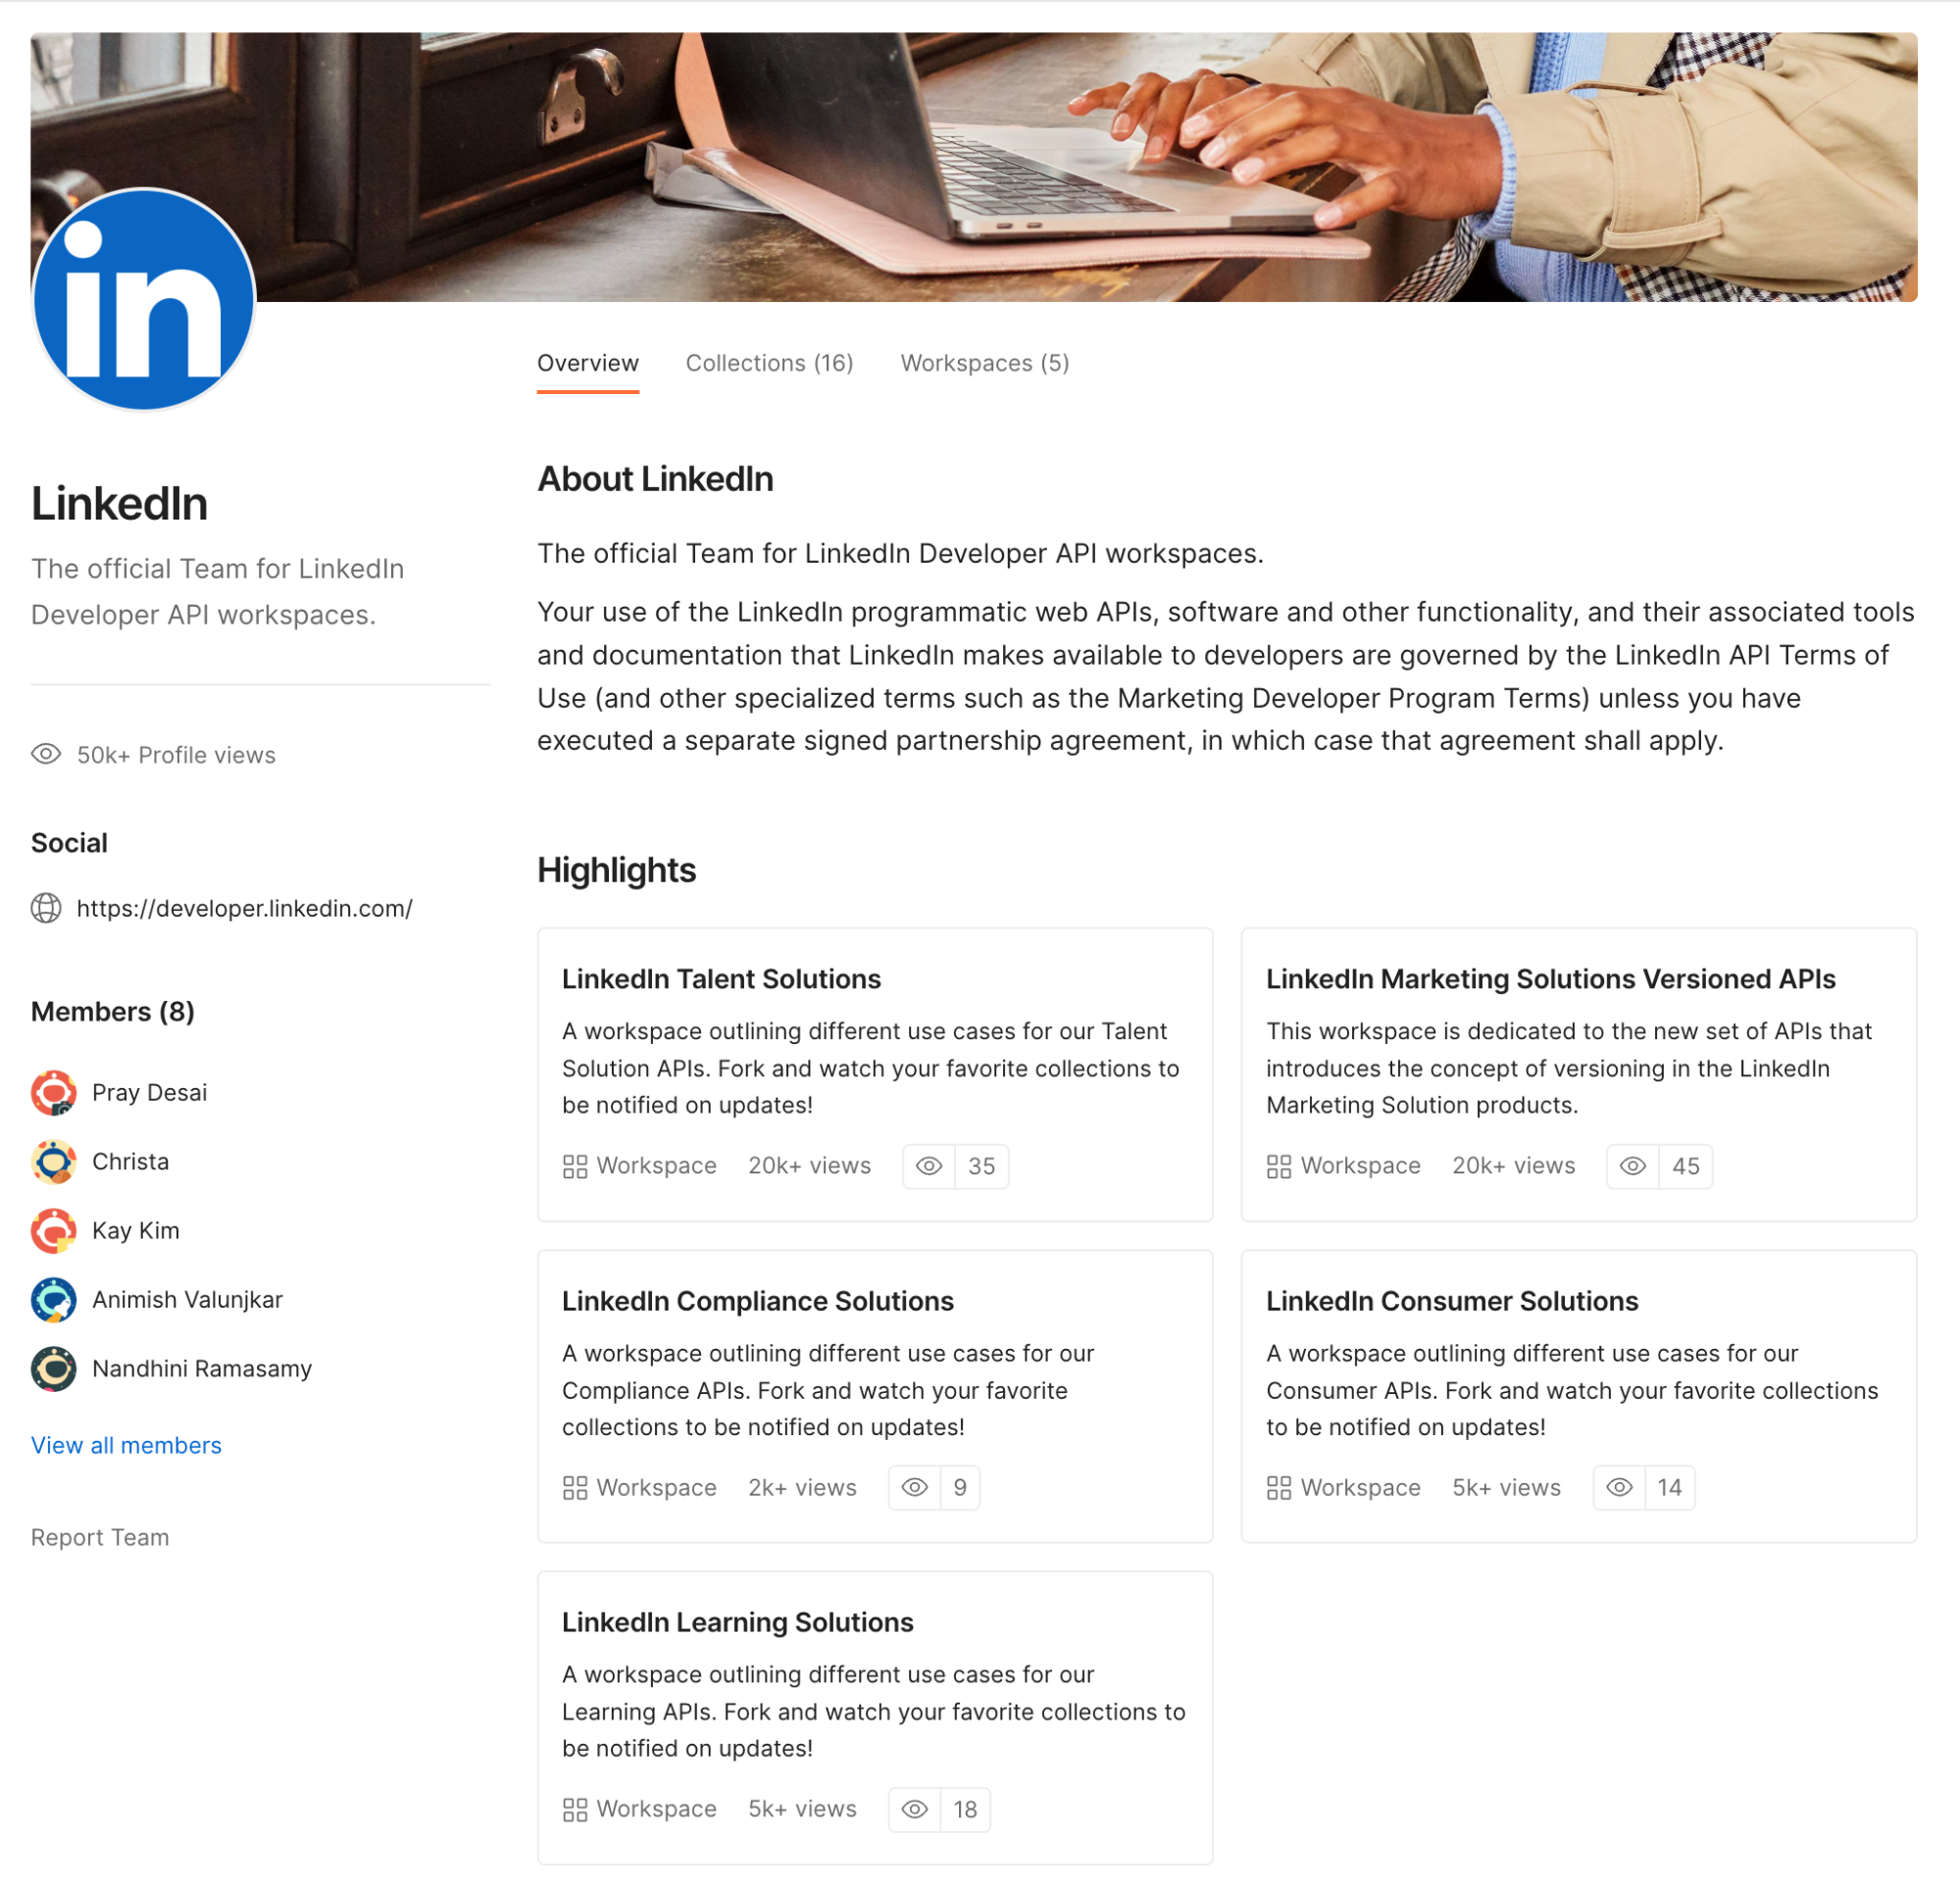 LinkedIn uses separate workspaces for each function